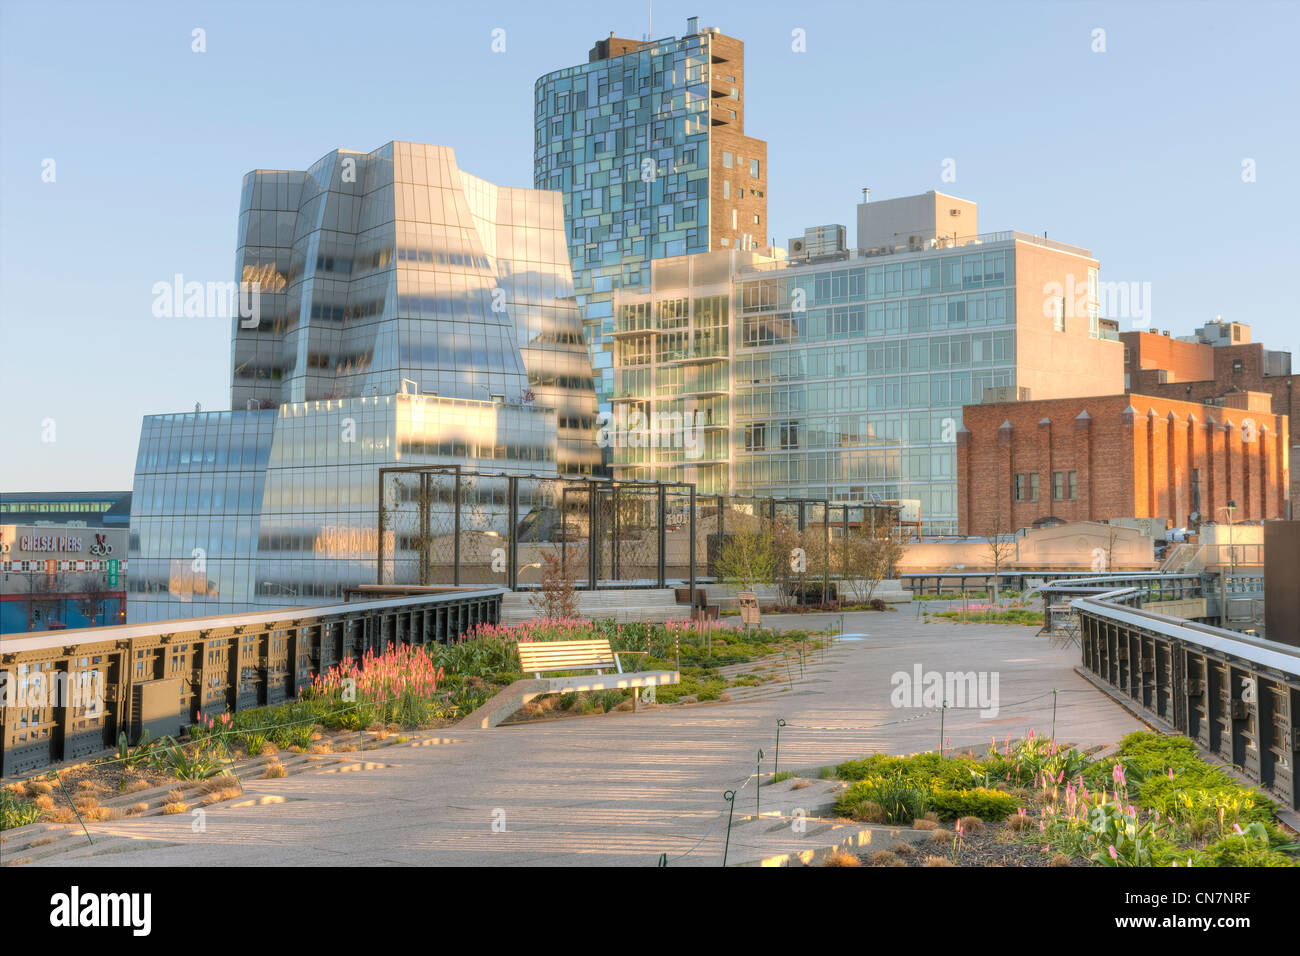 A view of the landscaping in High Line Park with the Frank Gehry designed IAC Building in the background in New York City. Stock Photo